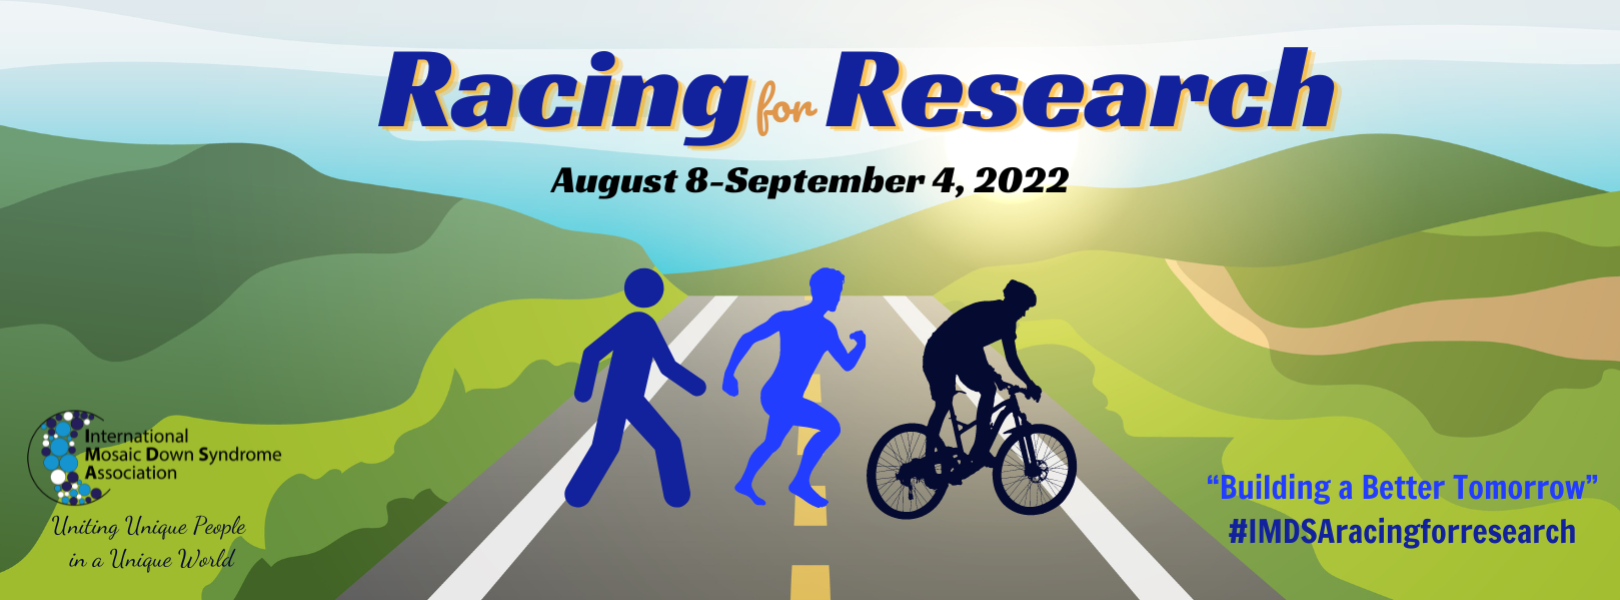 Racing for Research